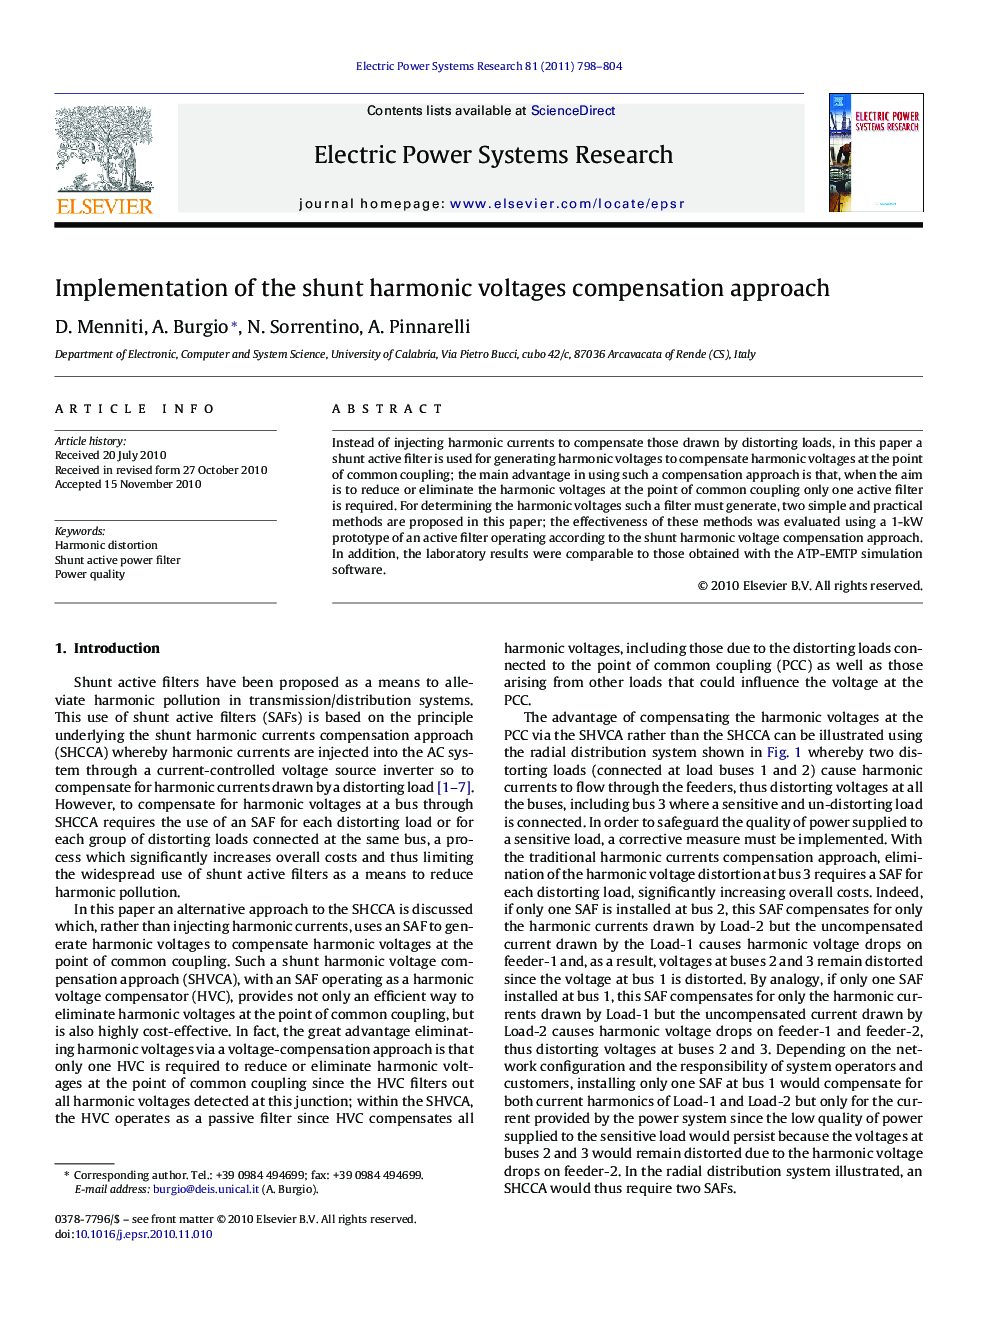 Implementation of the shunt harmonic voltages compensation approach